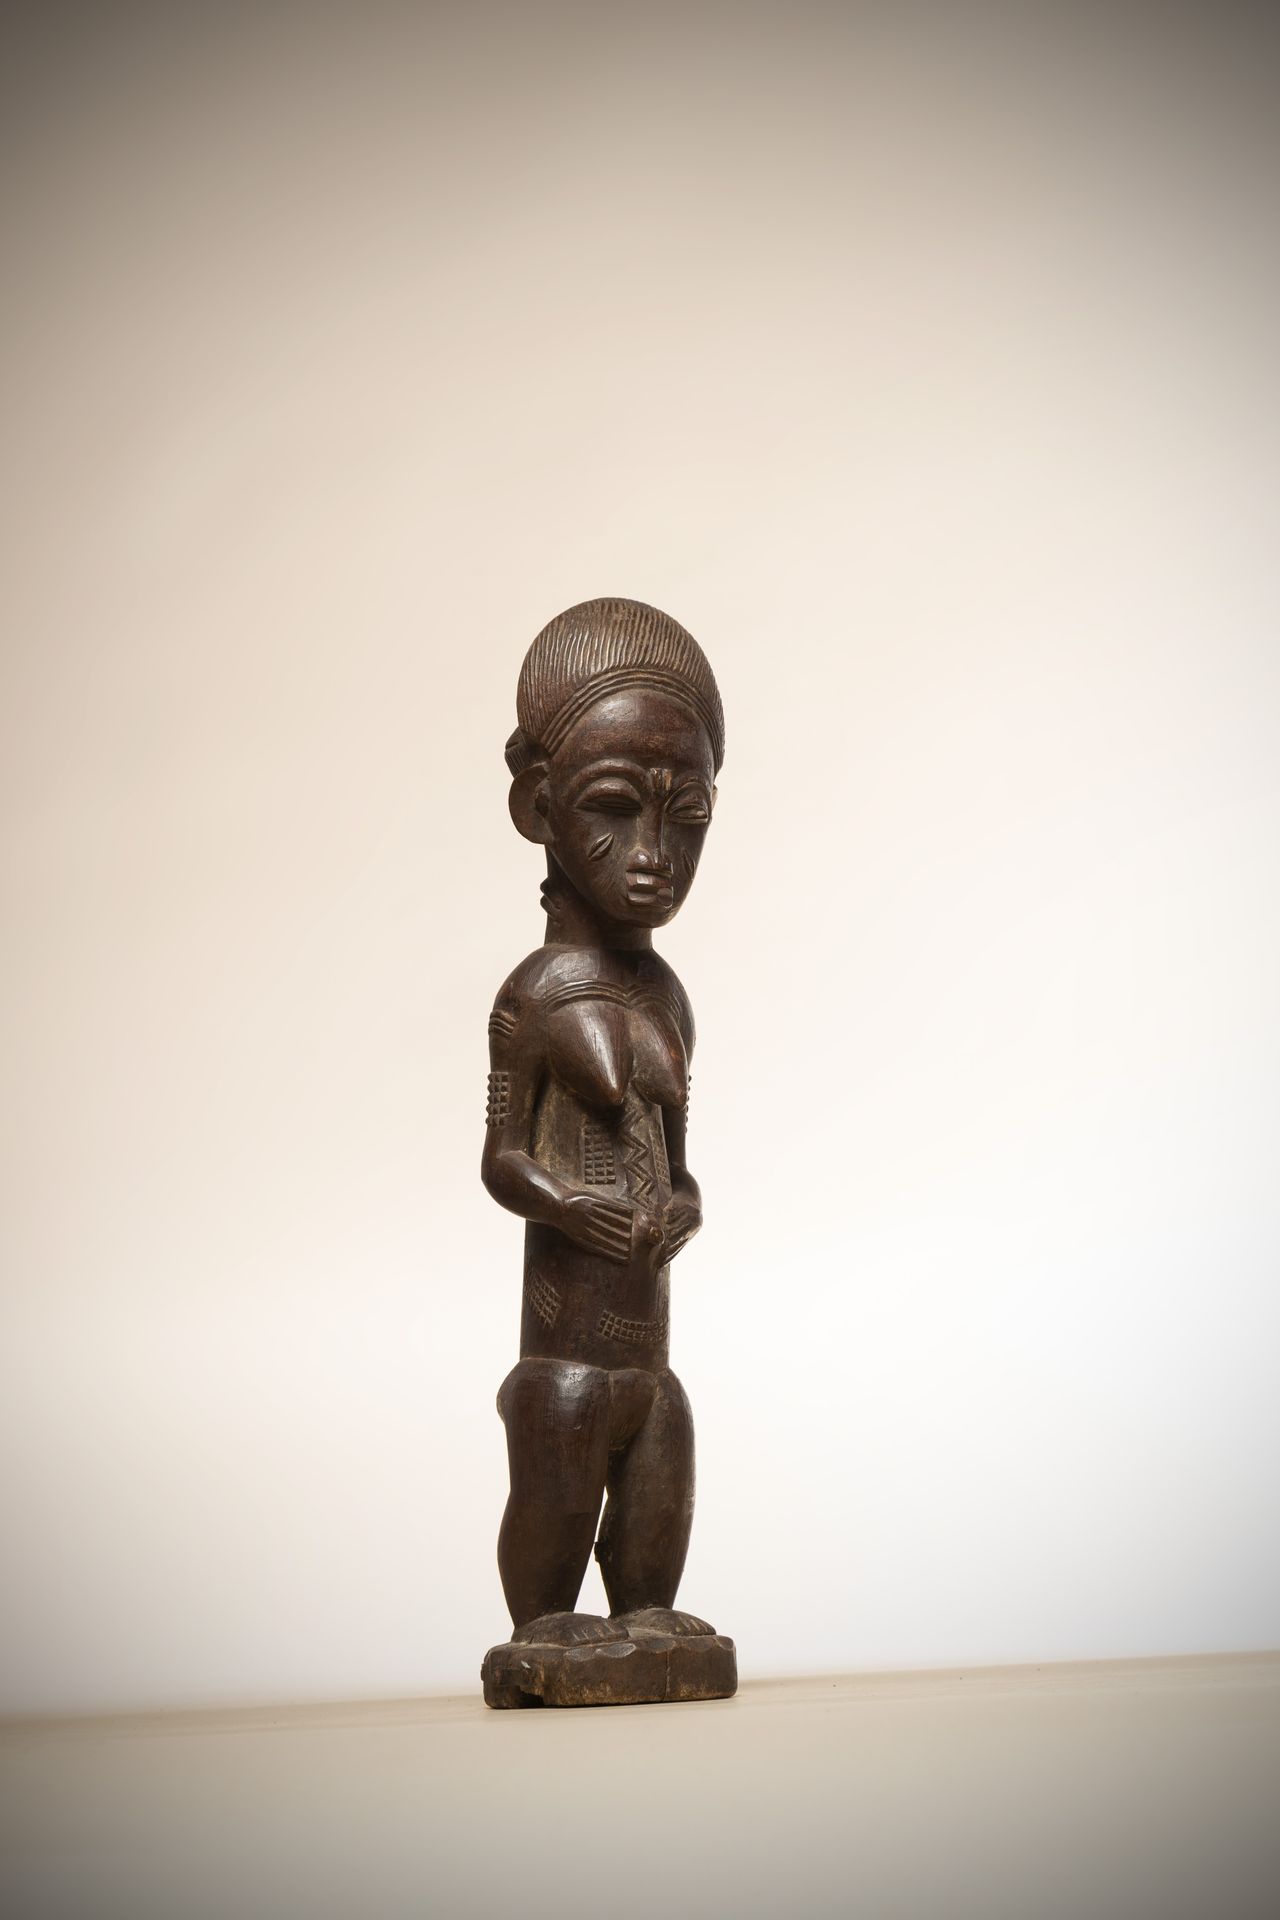 Null BAOULE (Ivory Coast)

Bloblobian" female statue wearing a diadem hairstyle,&hellip;